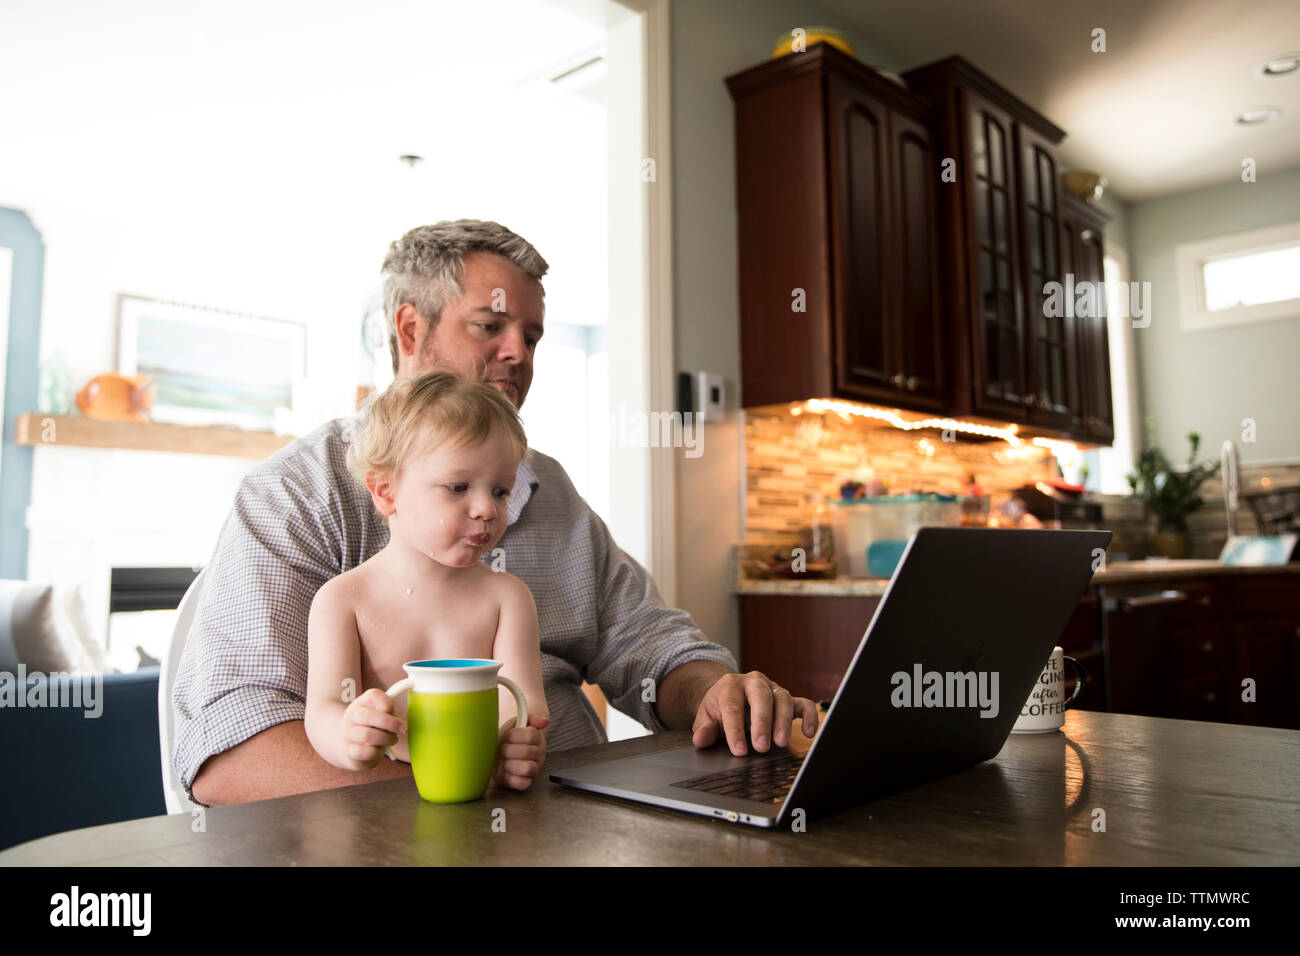 Work at Home Dad Sitting at Computer in Kitchen, Holding Toddler Son Stock Photo